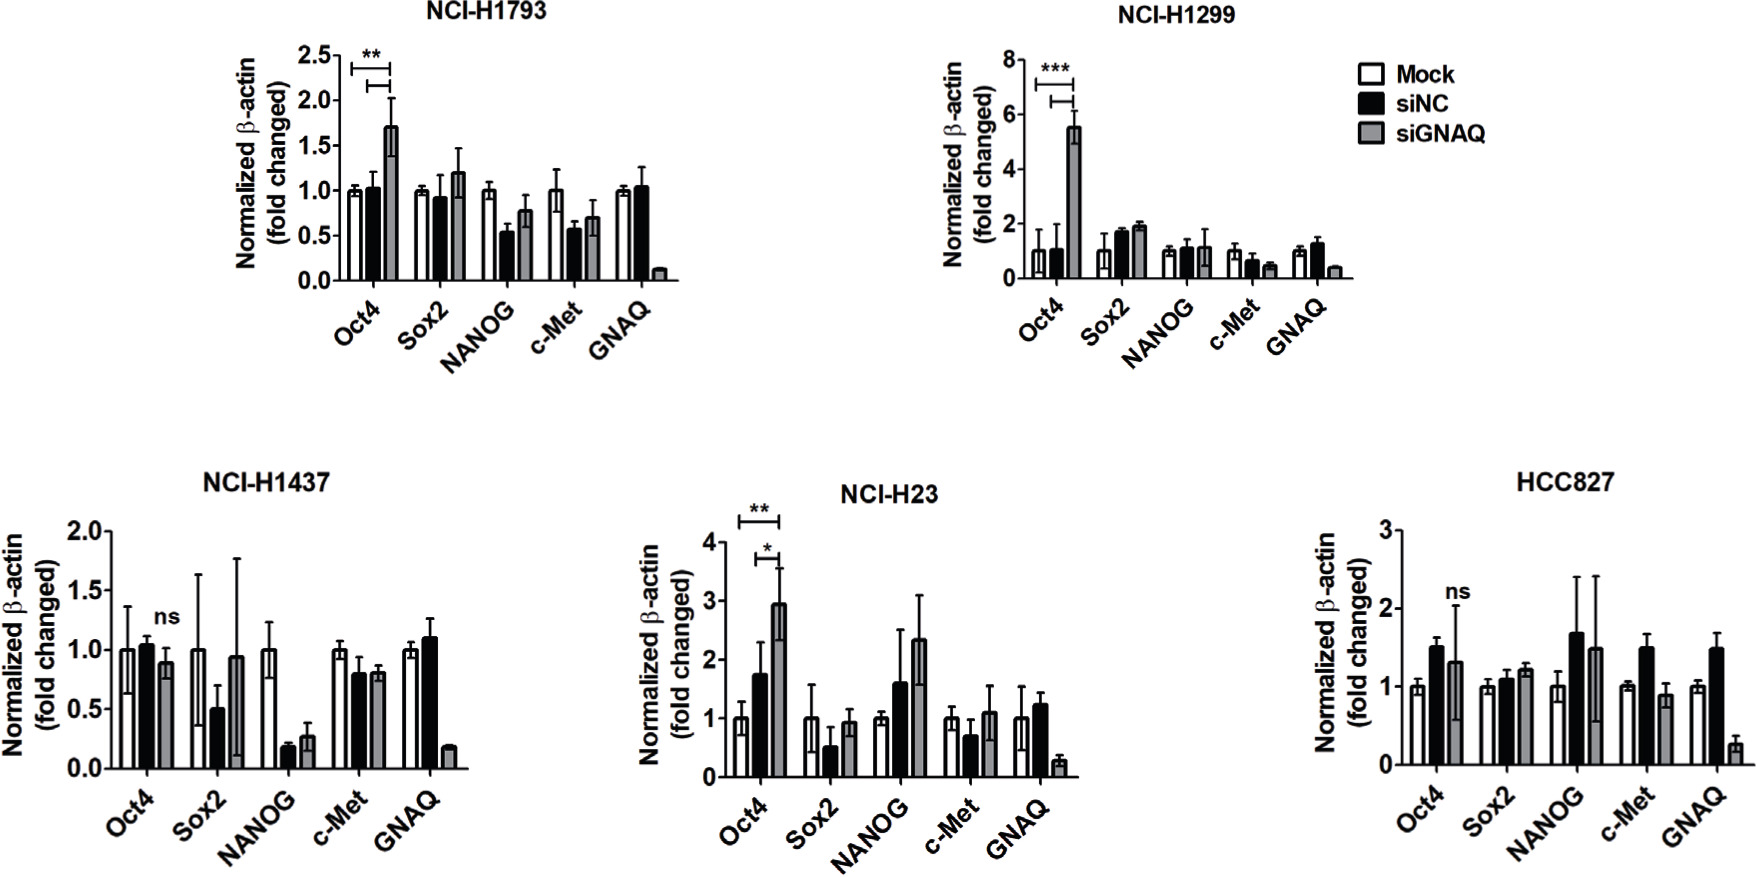 Fig. 4 
            Knockdown of G protein subunit alpha Q (GNAQ) enhances stem cell-like properties in lung cancer cells. Real-time quantitative polymerase chain reaction (PCR) analysis of Oct4, SOX2, NANOG, and cMet messenger RNA (mRNA) expression in lung cancer cell lines (NCI-H1793, NCI-H1299, NCI-H1437, NCI-H23, and HCC827). si, small interfering.
          